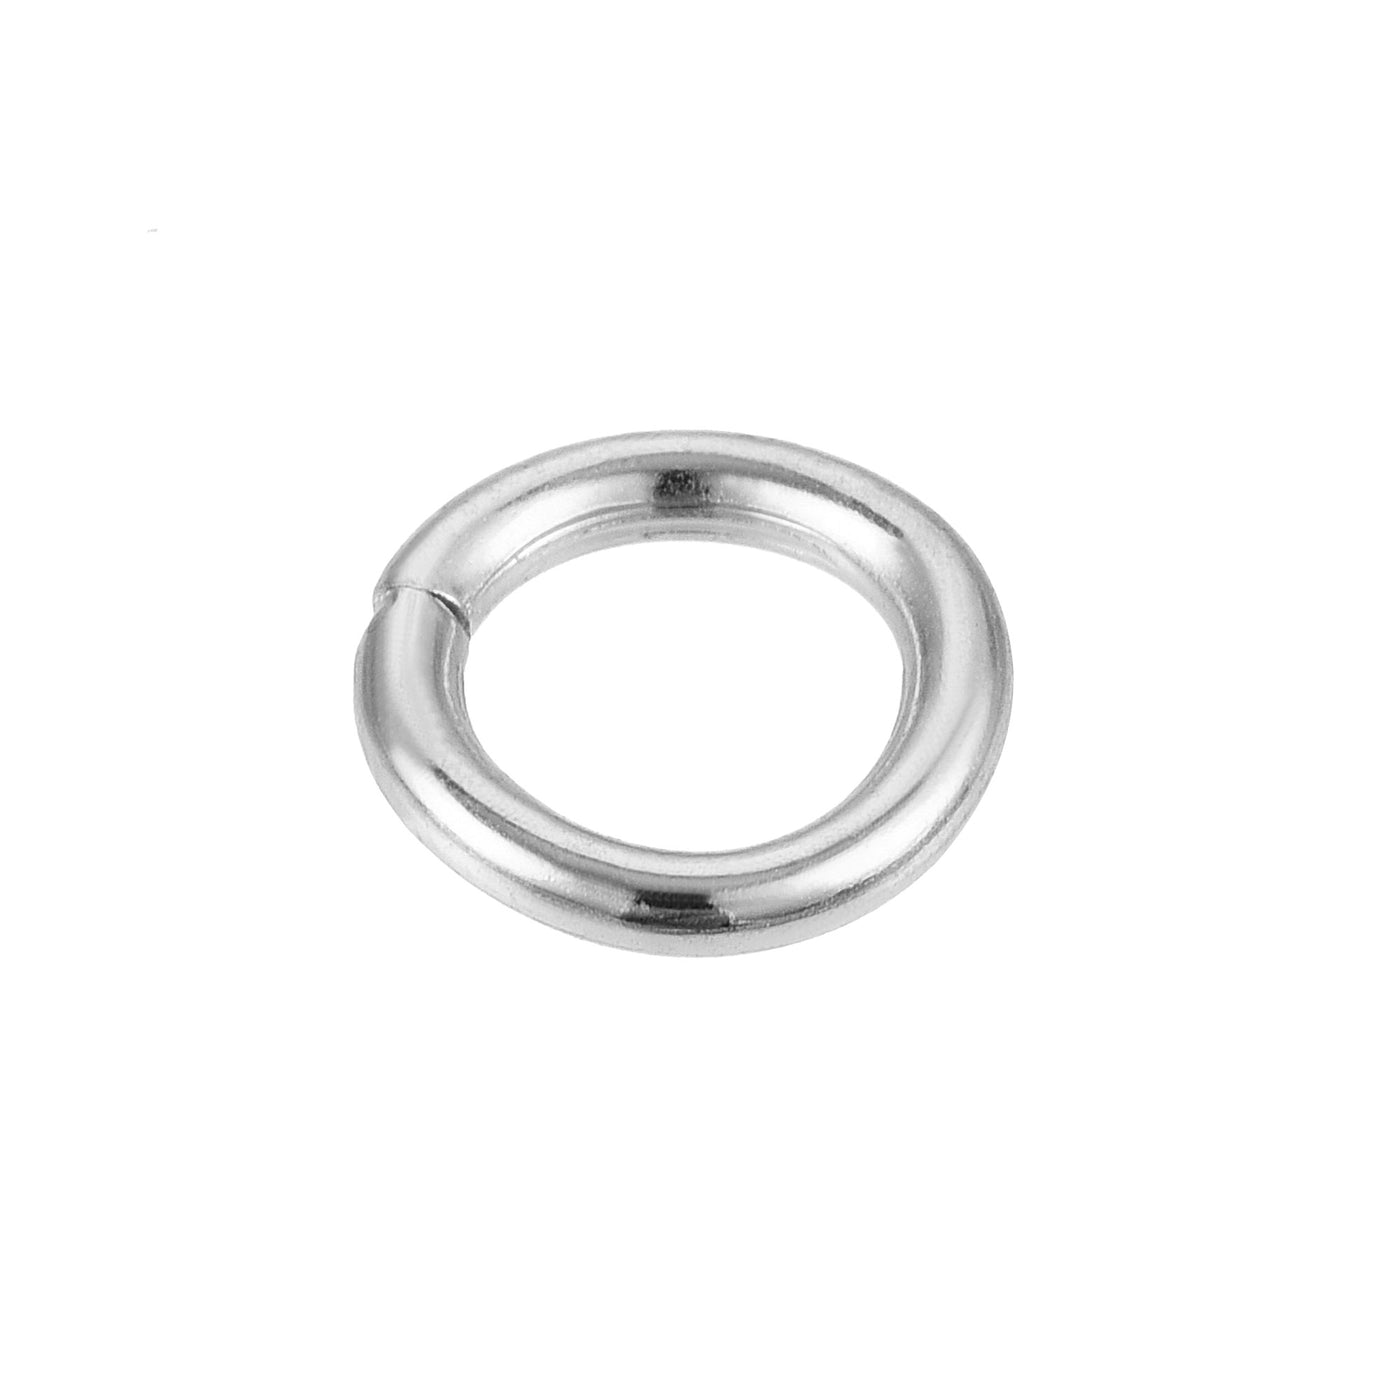 uxcell Uxcell 5mm Metal O Rings Non-Welded for Straps Bags Belts DIY Silver Tone 20pcs